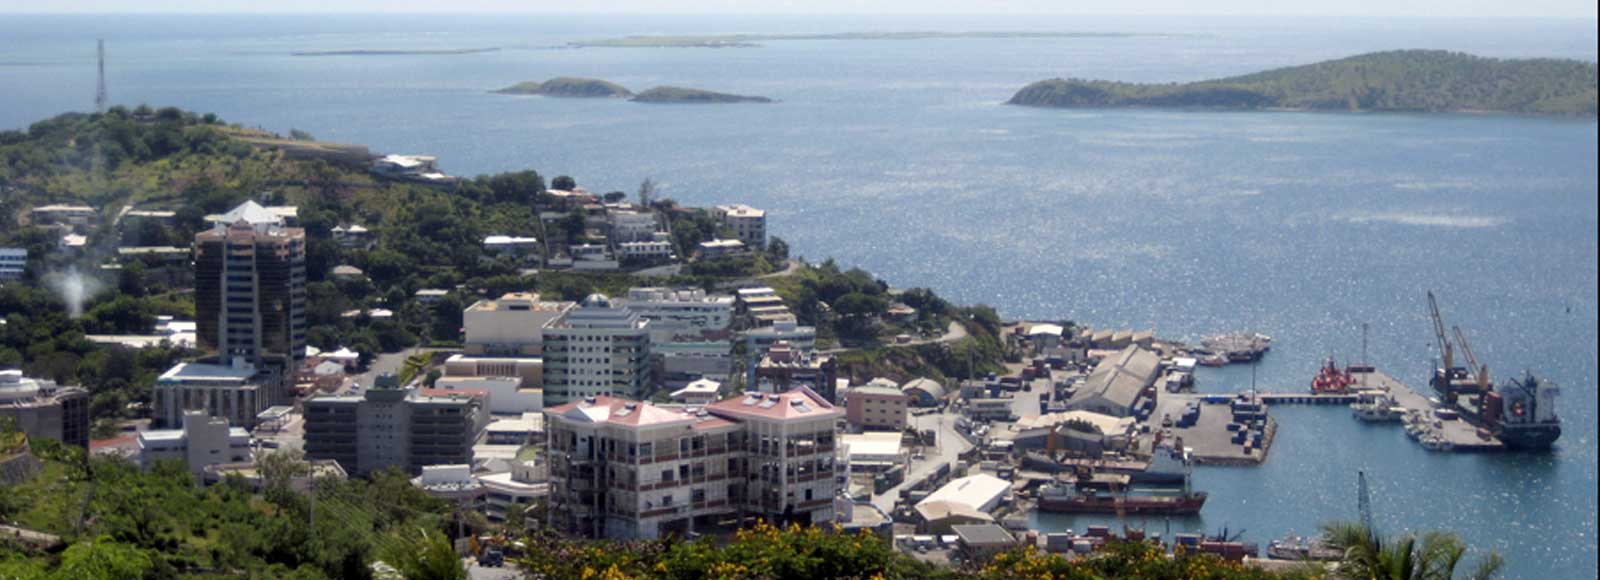 Transfer Offers in Port Moresby. Low Cost Transfers in  Port Moresby 